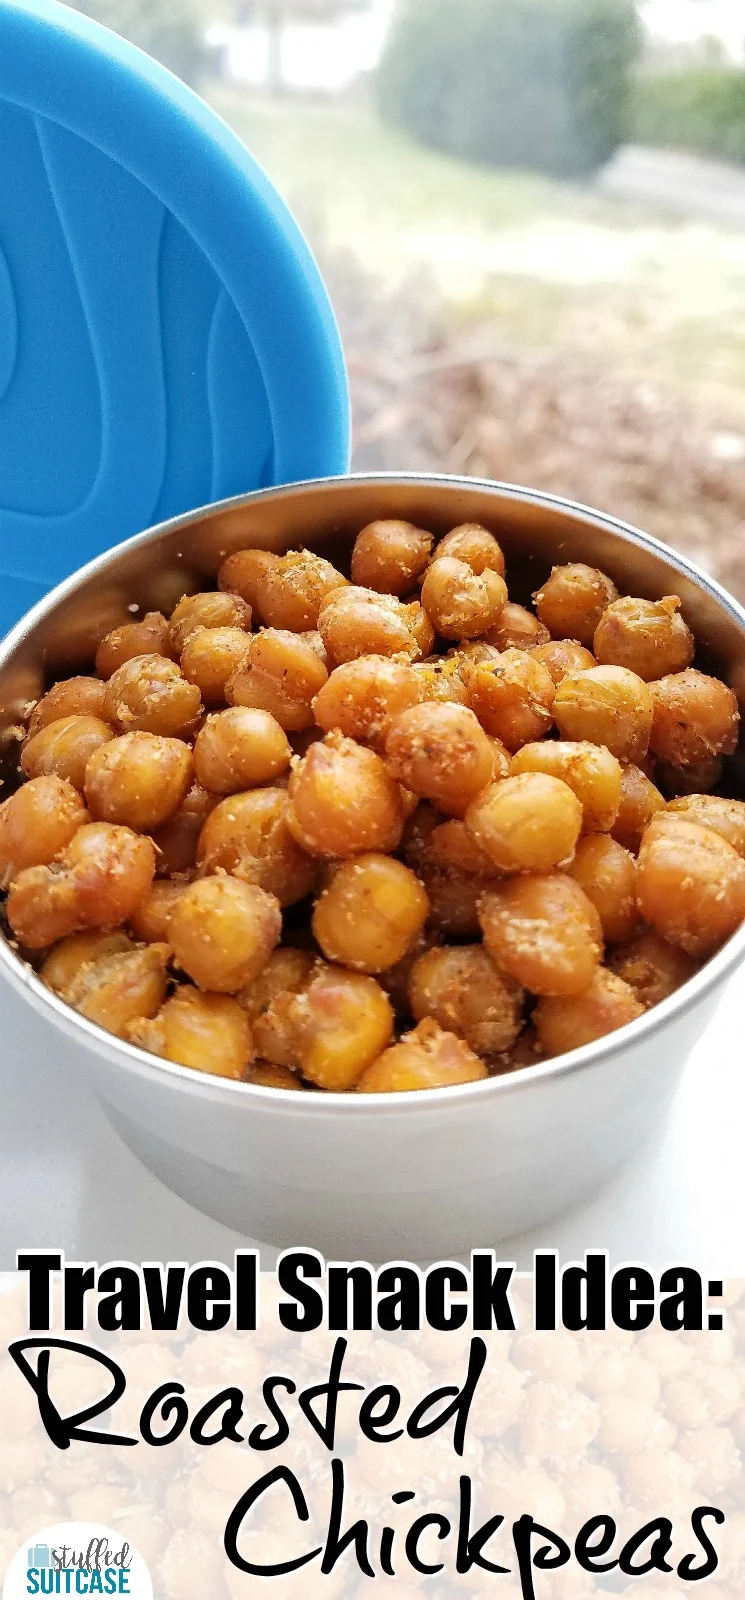 The best travel snack - roasted chickpeas! Protein snack with nutrients, great for road trip snacking & after school snacks!